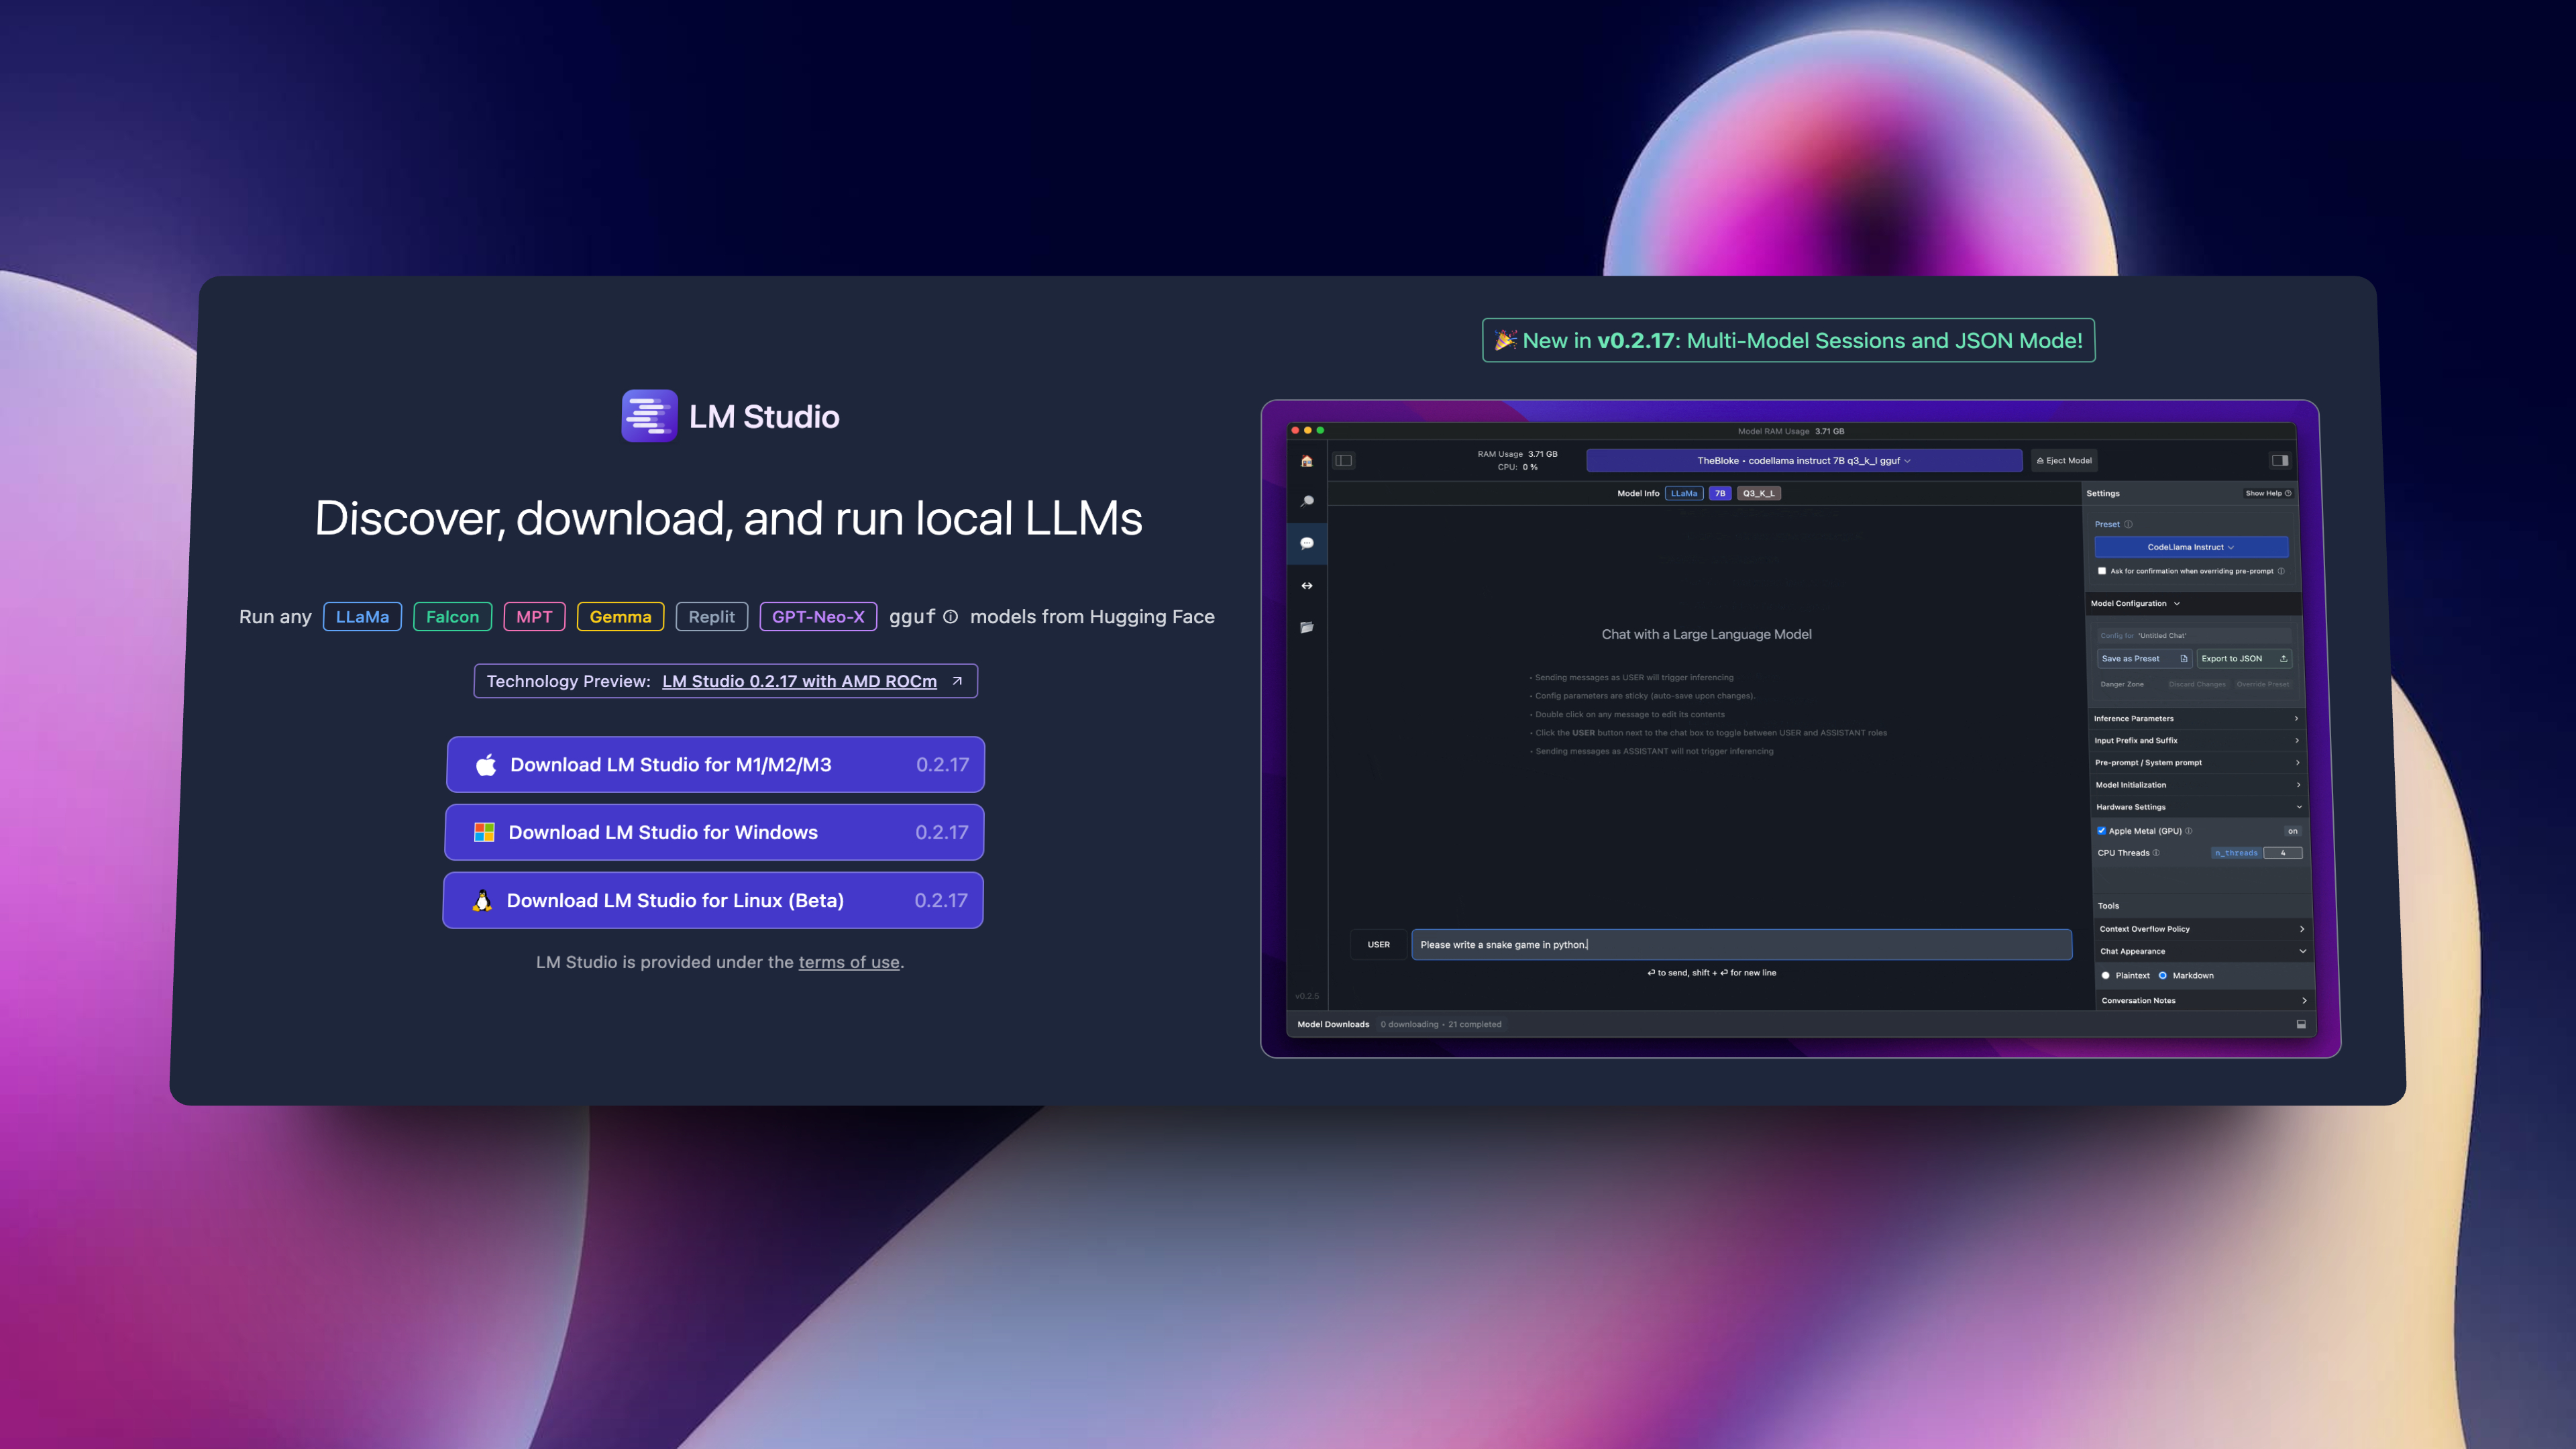 A screenshot of the LM Studio software interface, which allows users to discover, download, and run local large language models from various providers on different operating systems.